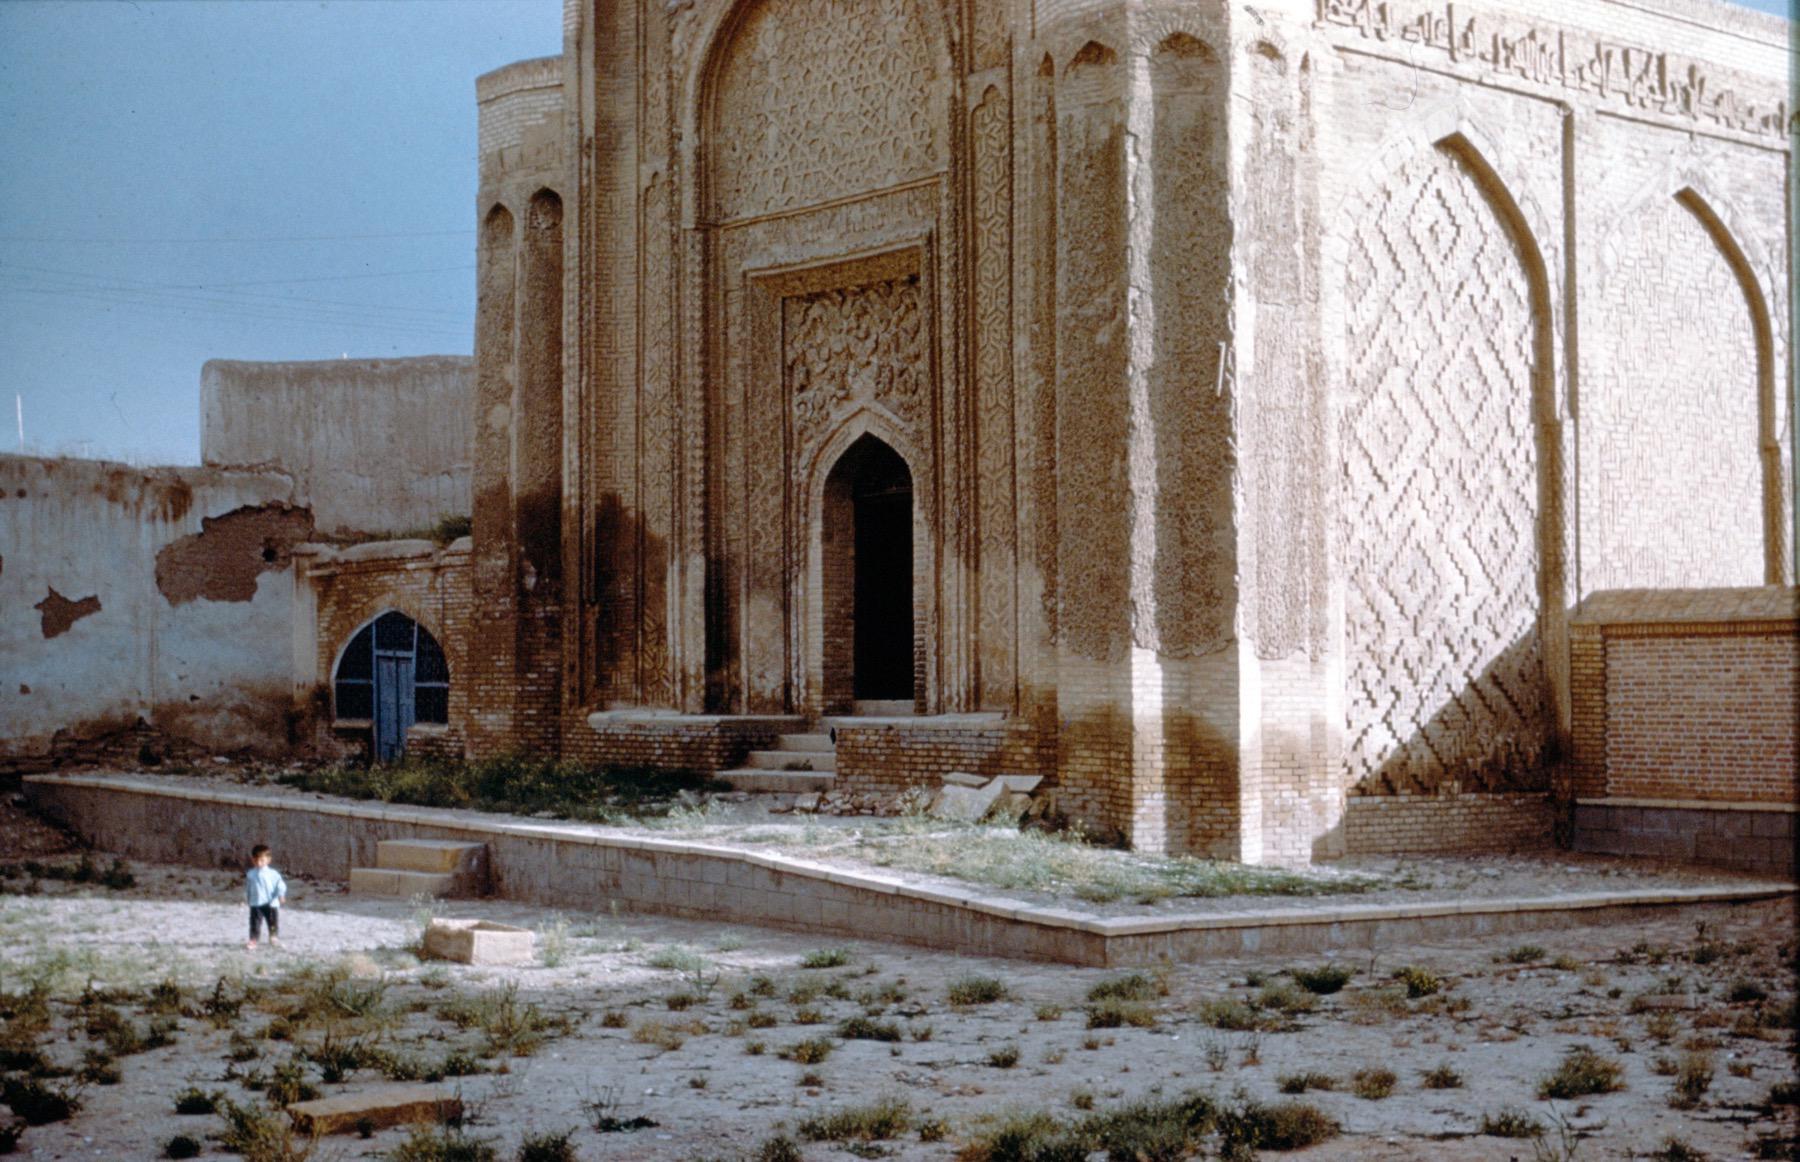 Gunbad-i Alaviyyan - Exterior view of entry and side elevation